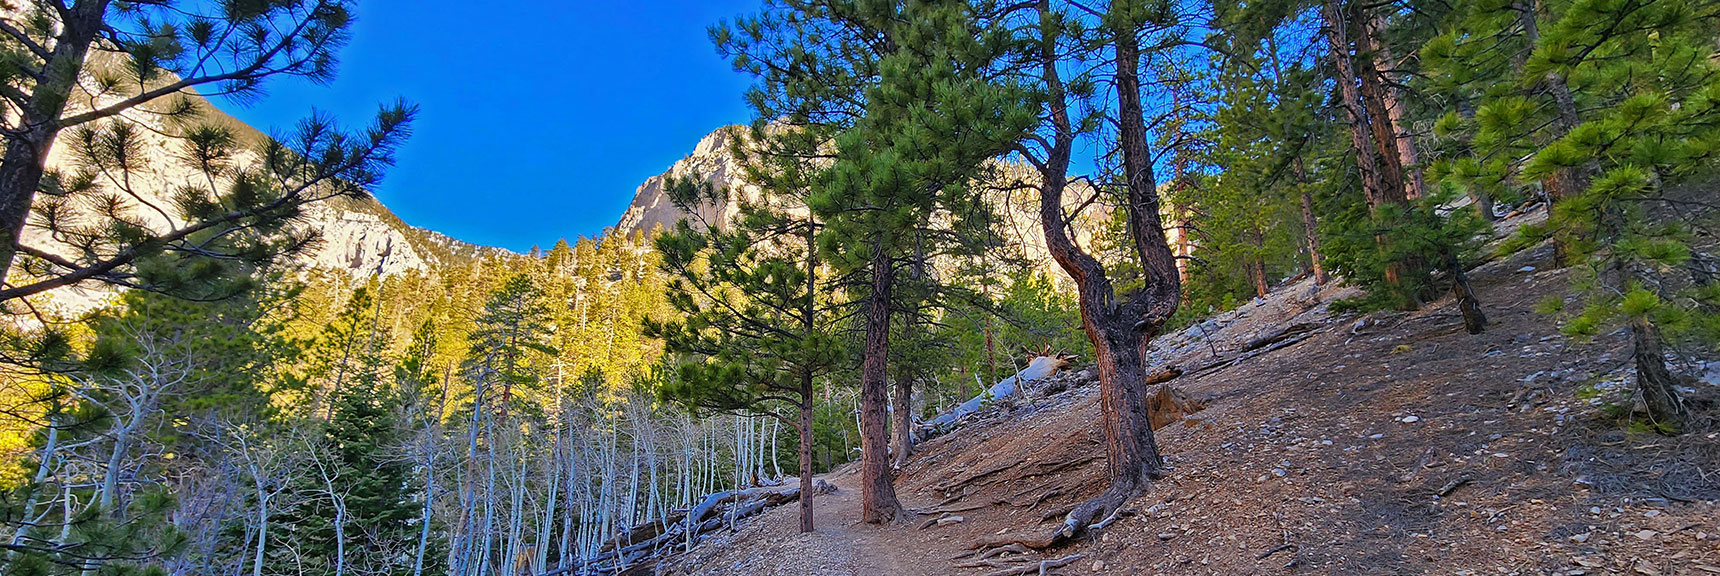 Sound Like Faint Wind...It's the Falls Ahead | Mary Jane Falls | Mt. Charleston Wilderness | Spring Mountains, Nevada